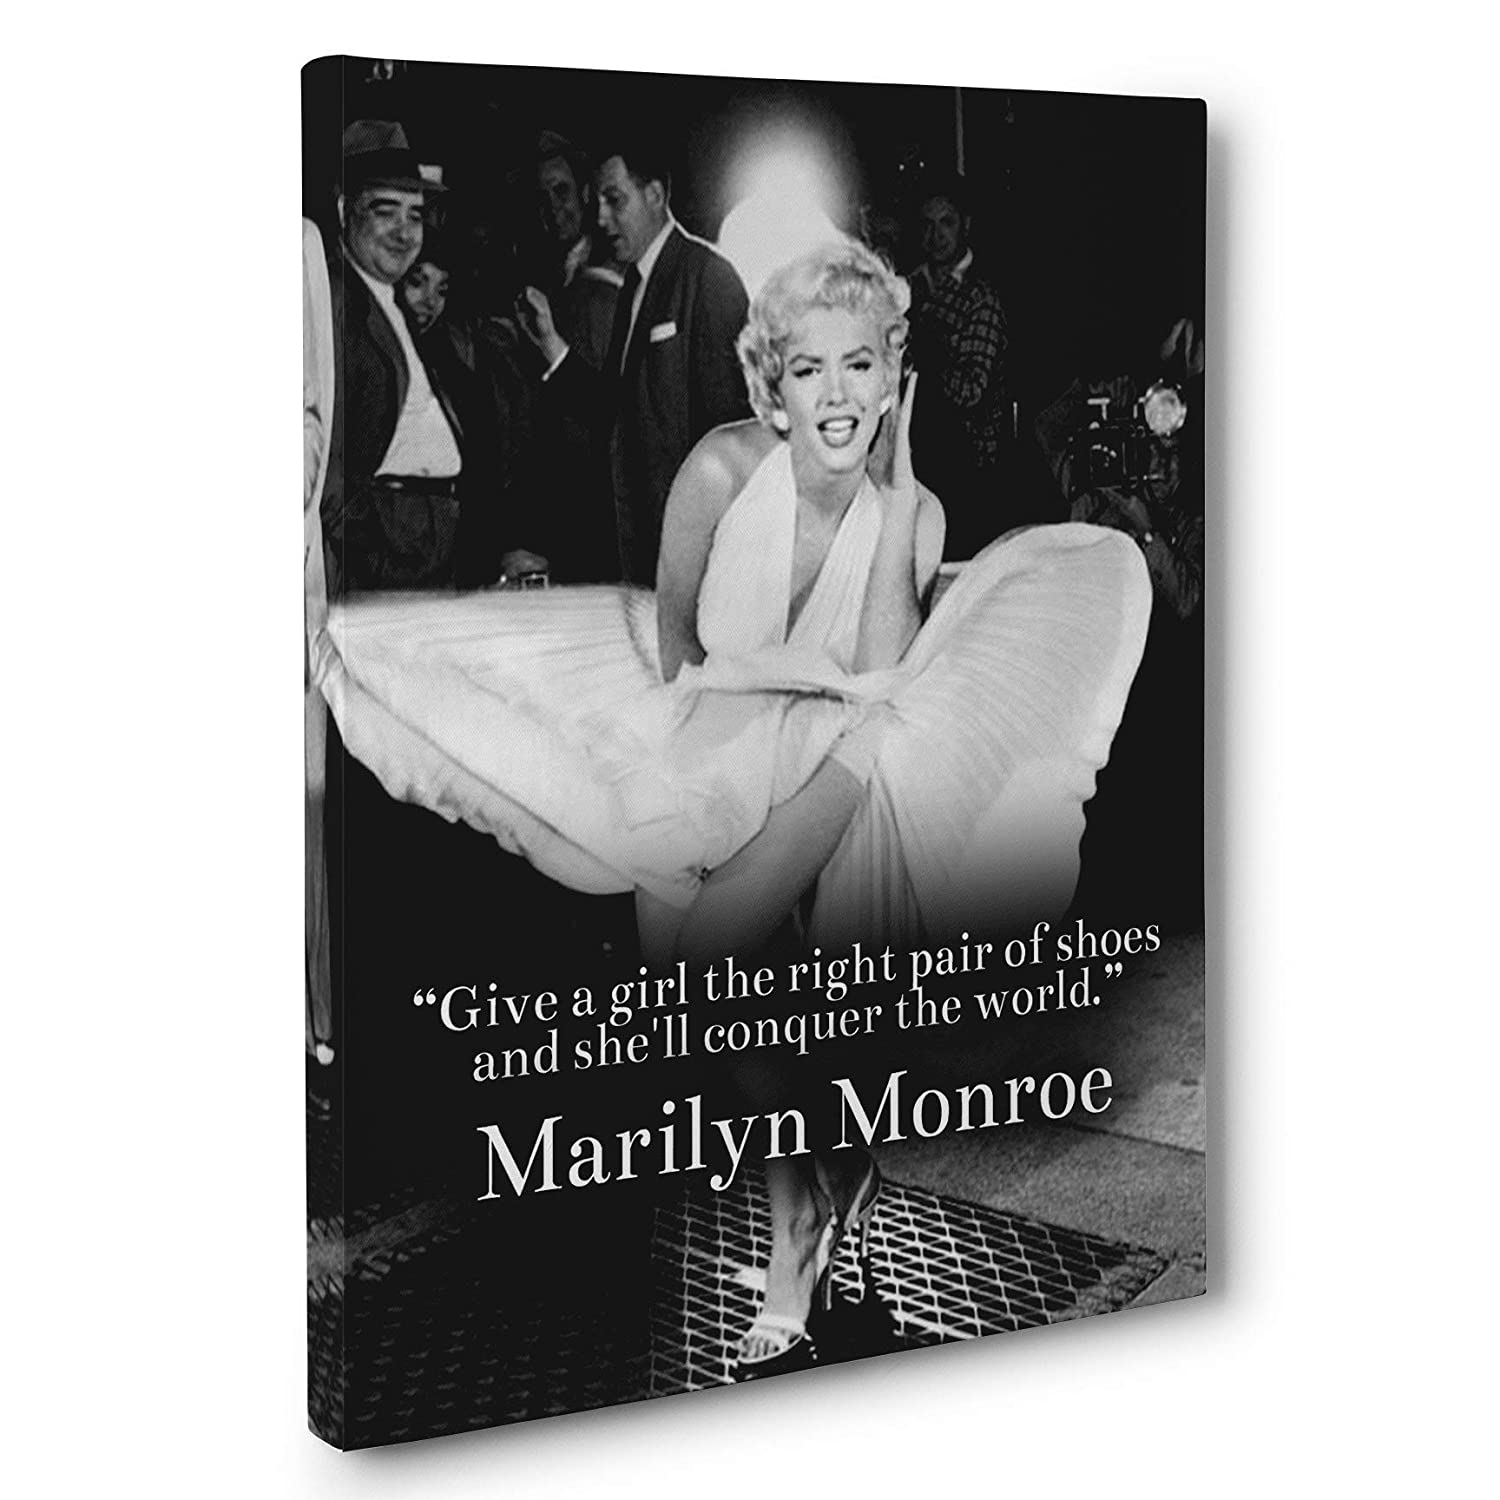 Marilyn Monroe Immperfection Quote Lovely Wood Travel Bag Luggage Tag